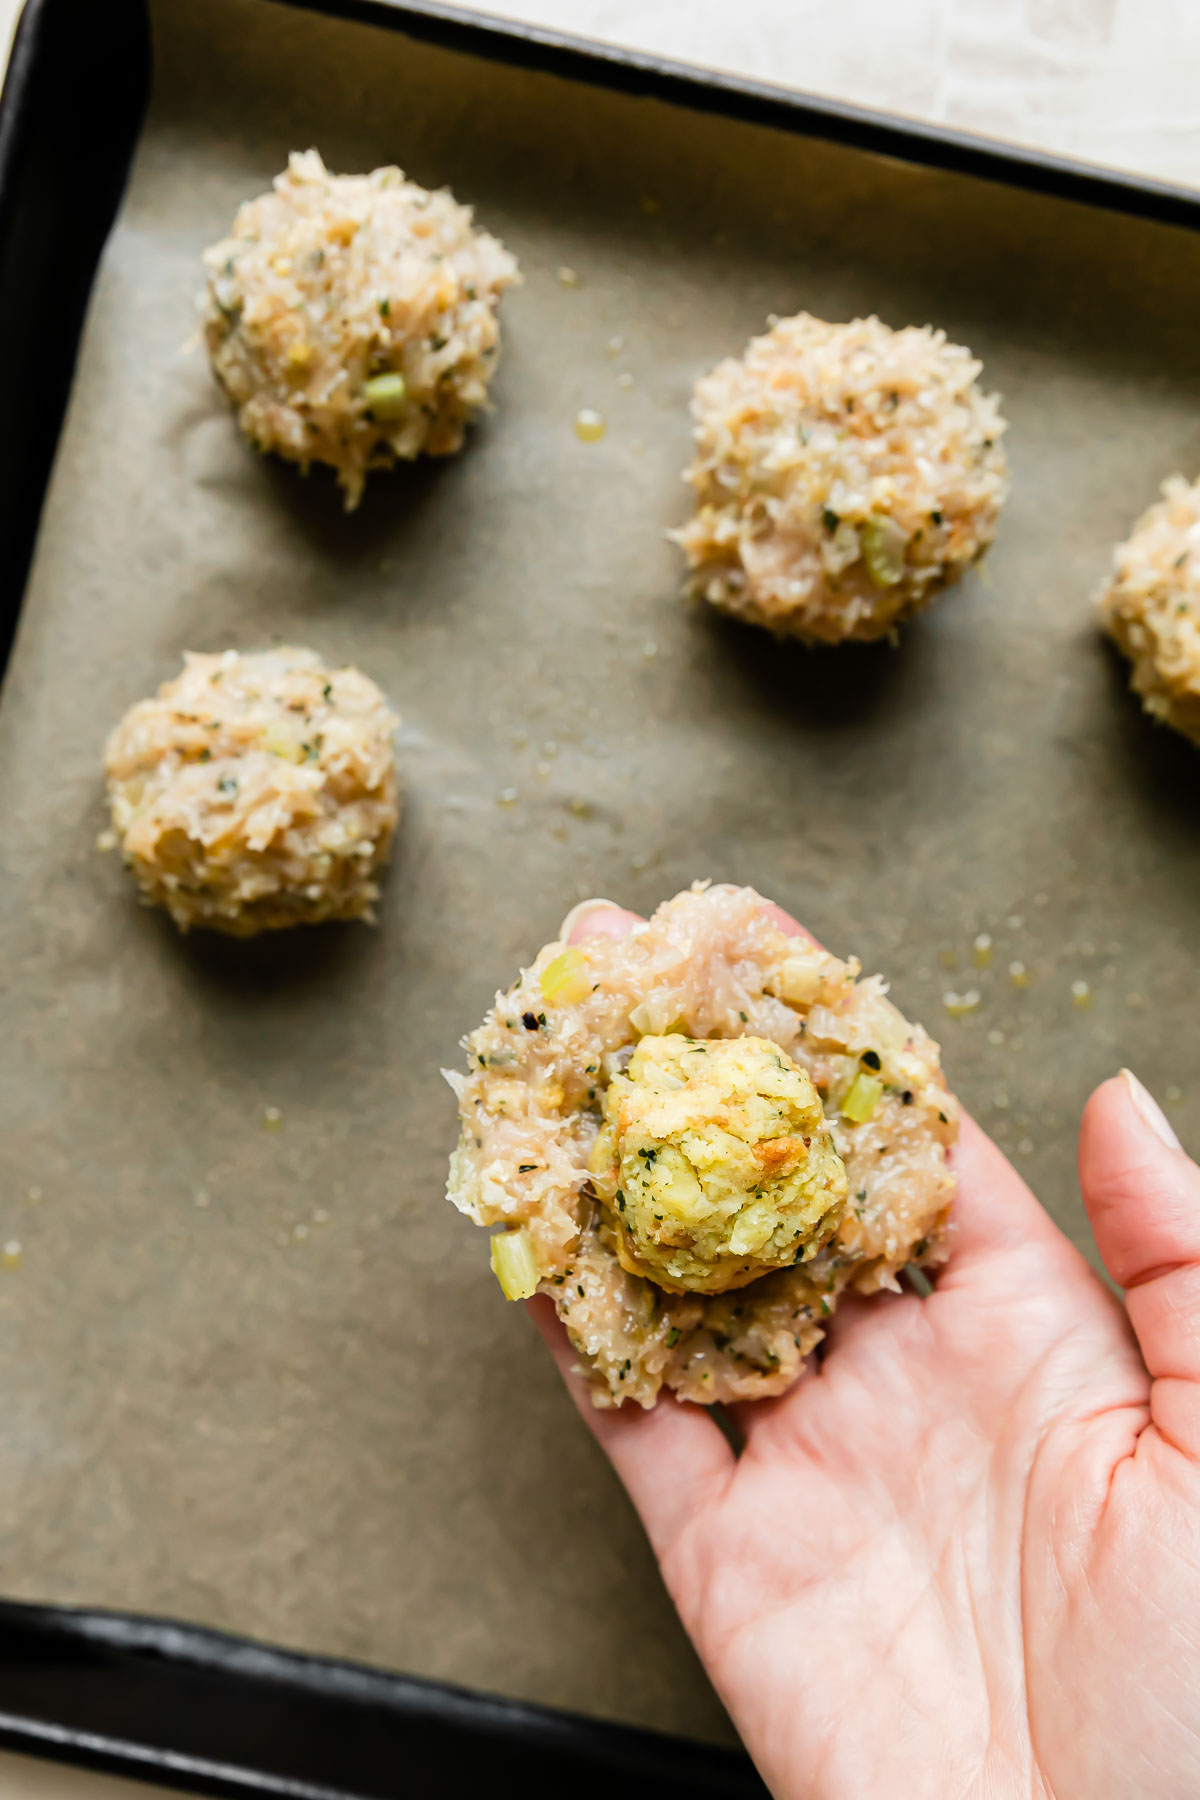 A woman's hand holds a small patty of turkey meatball mixture with a small ball of stovetop stuffing placed in the center of the meatball mixture patty. The patty and stuffing ball are held above a parchment lined baking sheet with stuffed & formed turkey stuffing meatballs arranged atop the parchment paper.